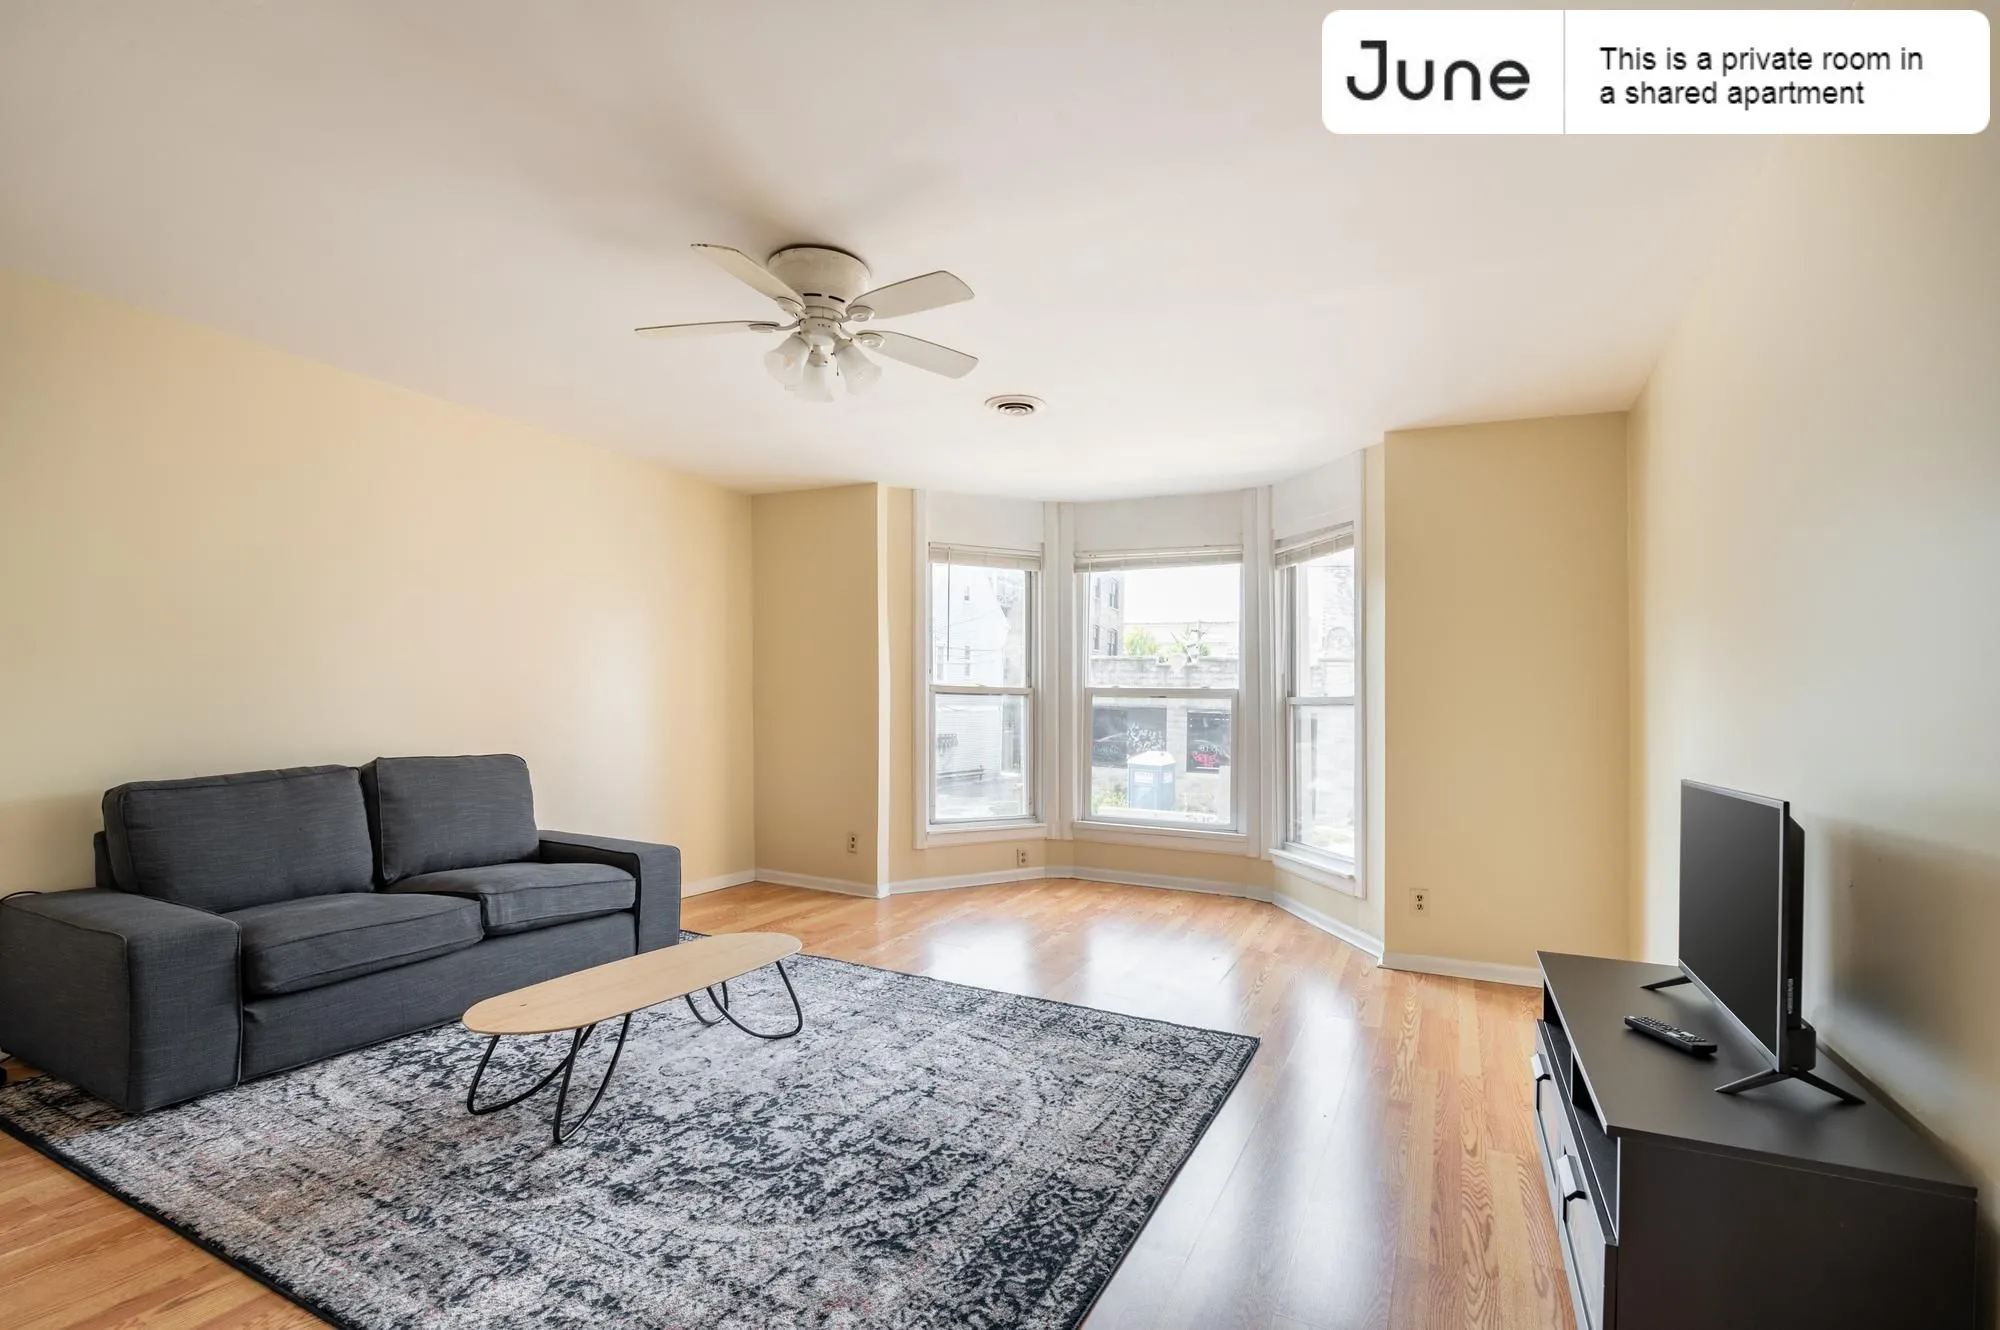 2619 N CALIFORNIA AVE 60647-Room For Rent-unit#02-Chicago-IL